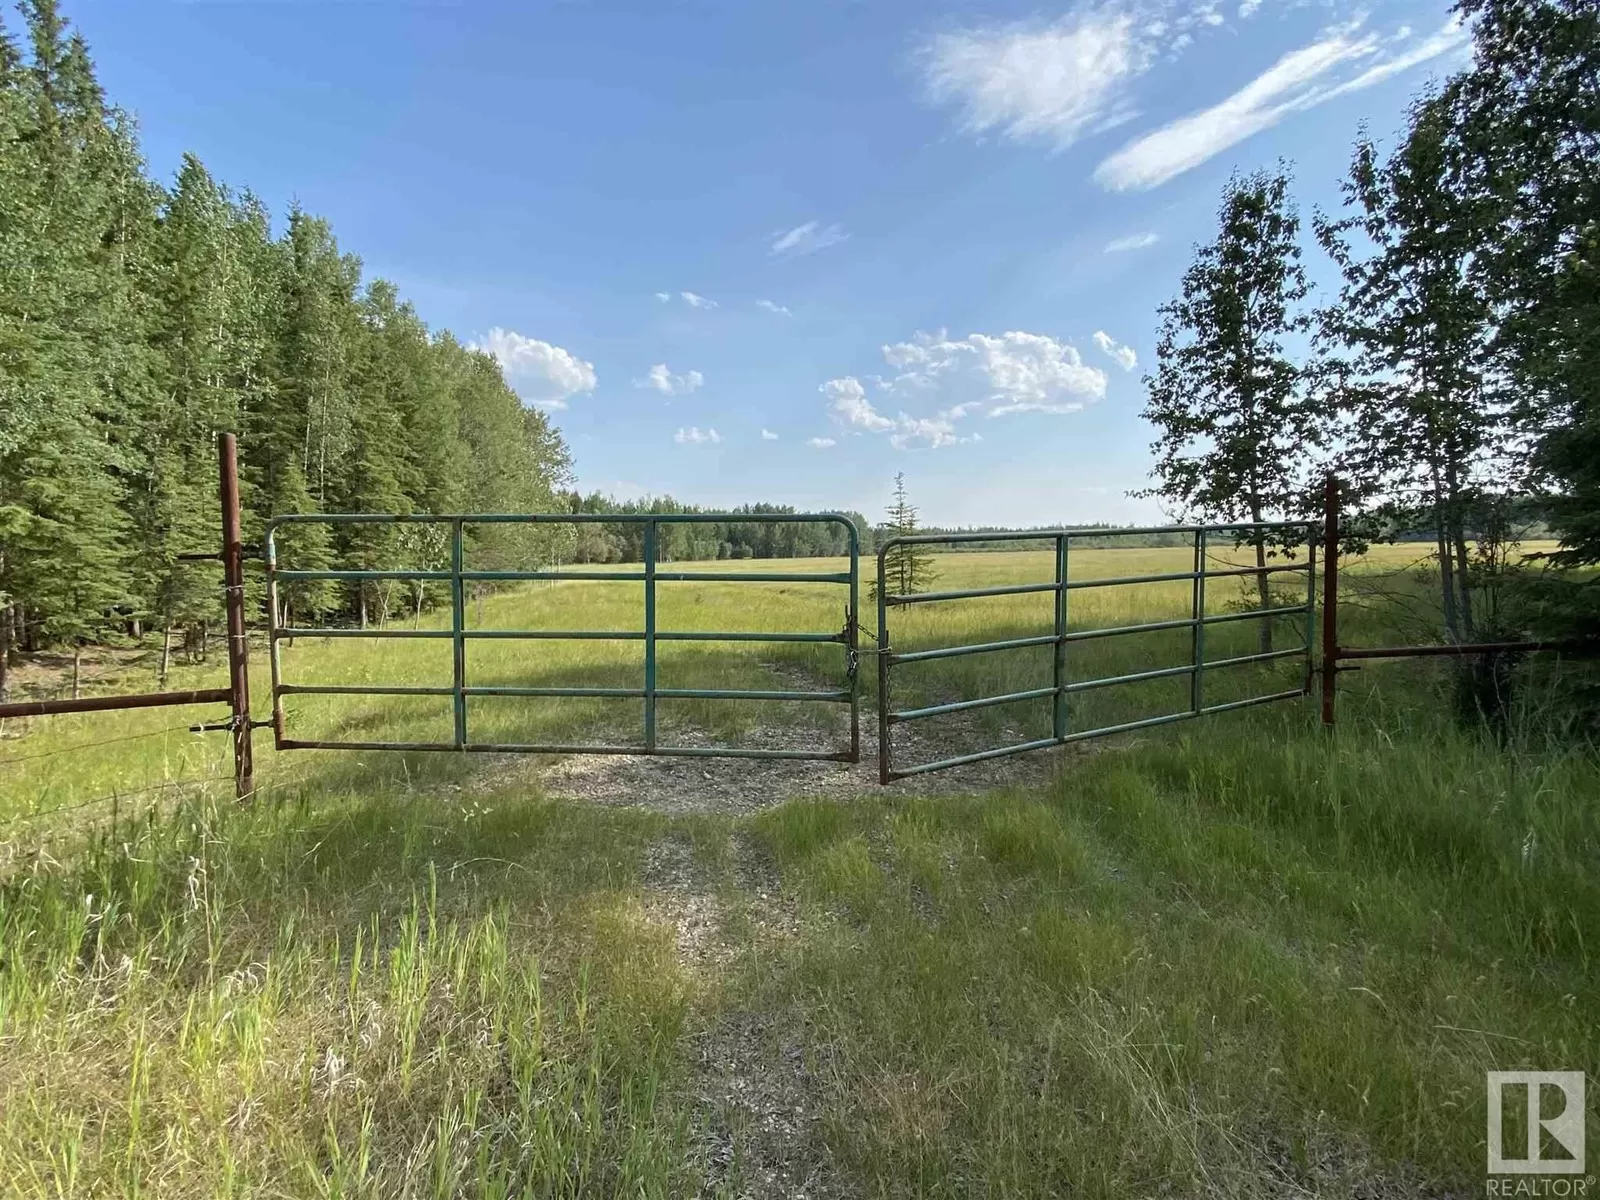 No Building for rent: Rr84 And Hwy 621, Rural Brazeau County, Alberta T7A 2A3